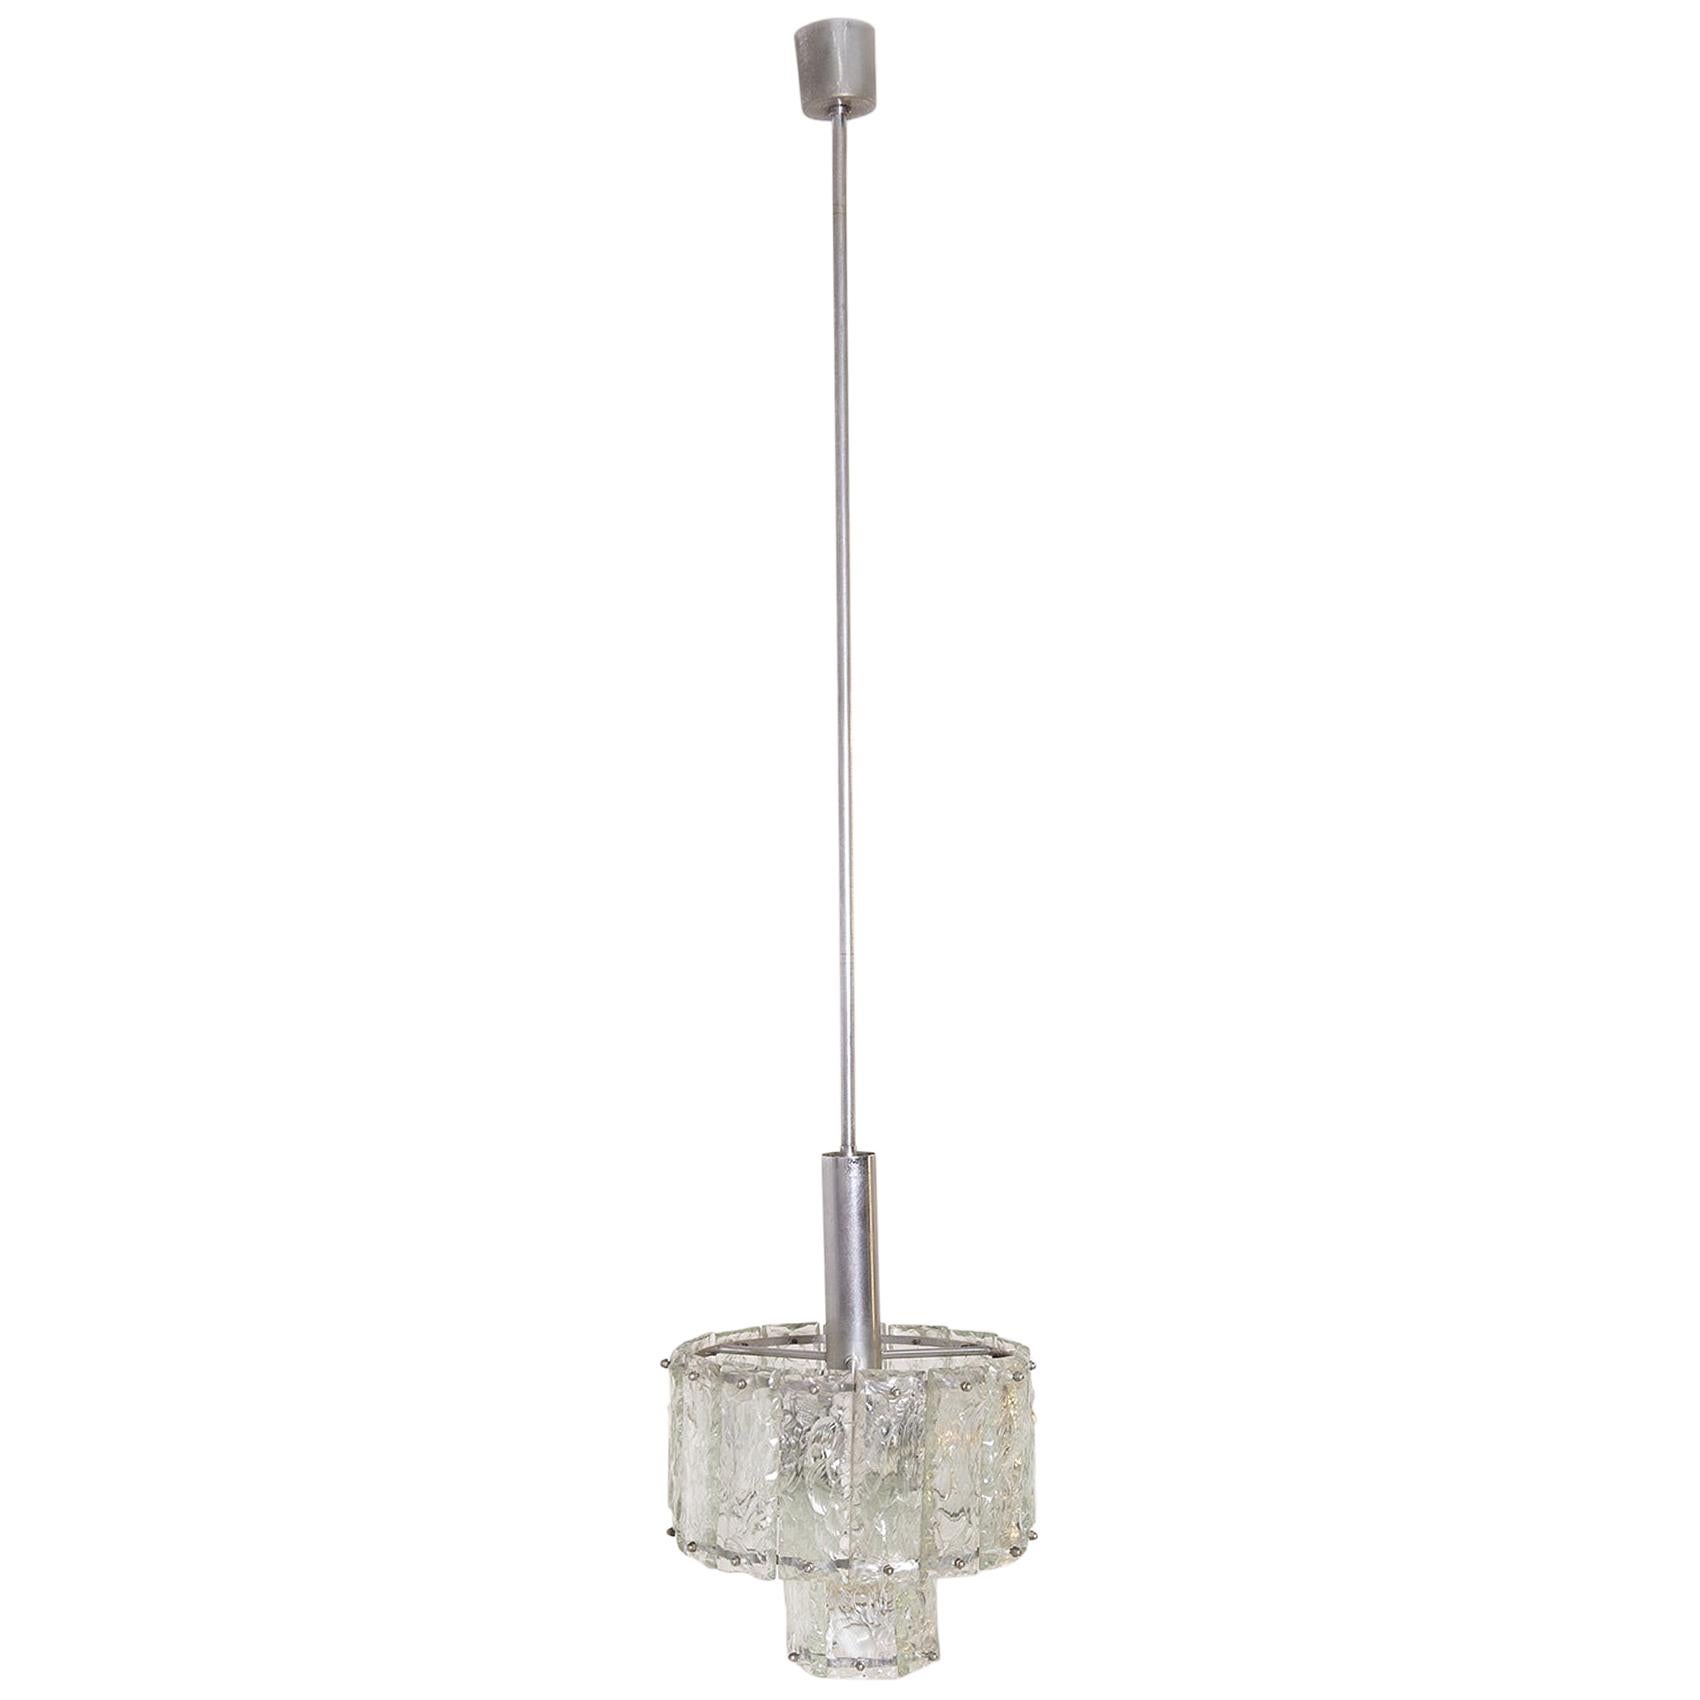 Italian Midcentury Pendant in Nickel-Plated and Glass, 1960s